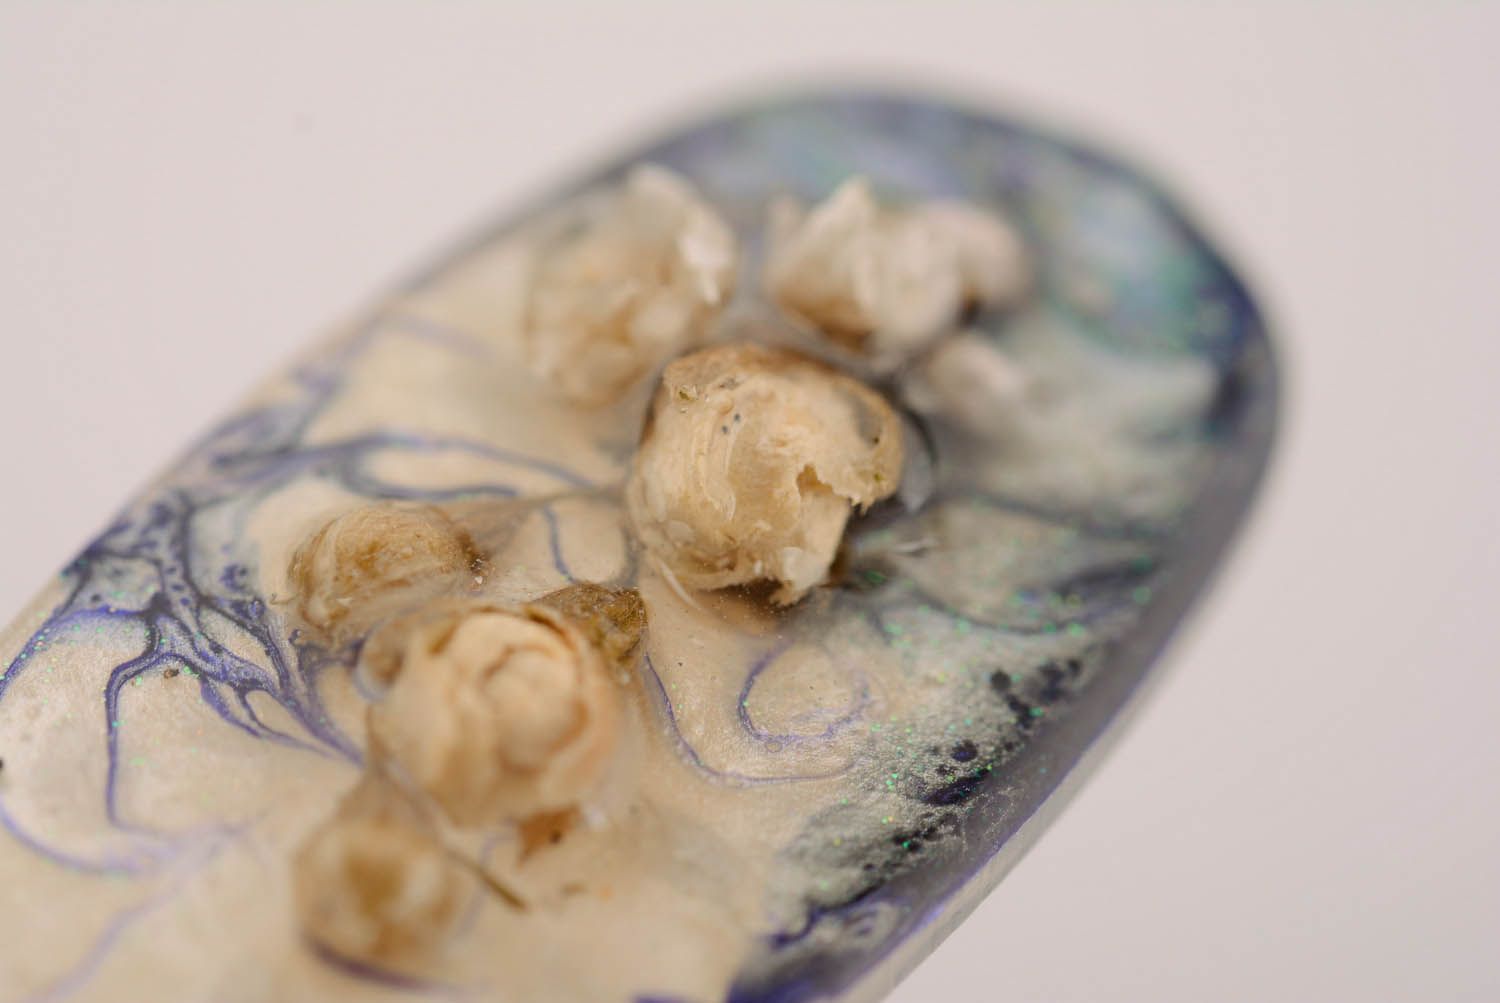 Earrings made of flowers and epoxy resin photo 4